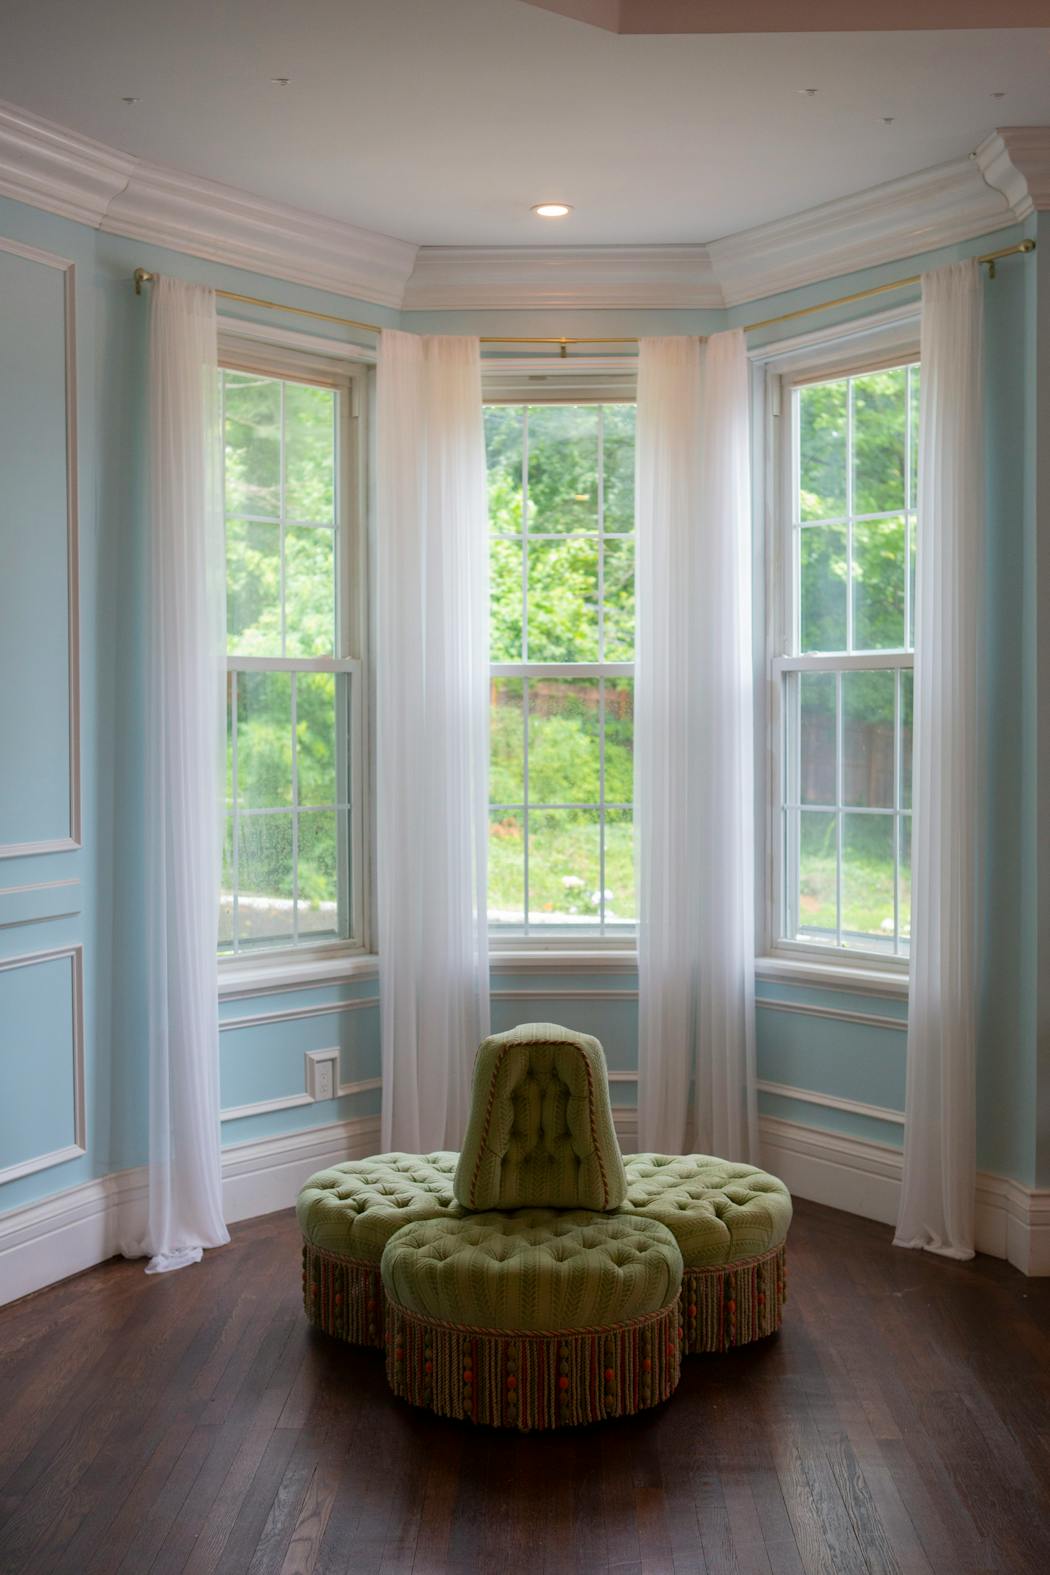 The Artys chose a bright blue paint color for the walls of this living area, and white wainscoting provides visual detail to draw the space together. 